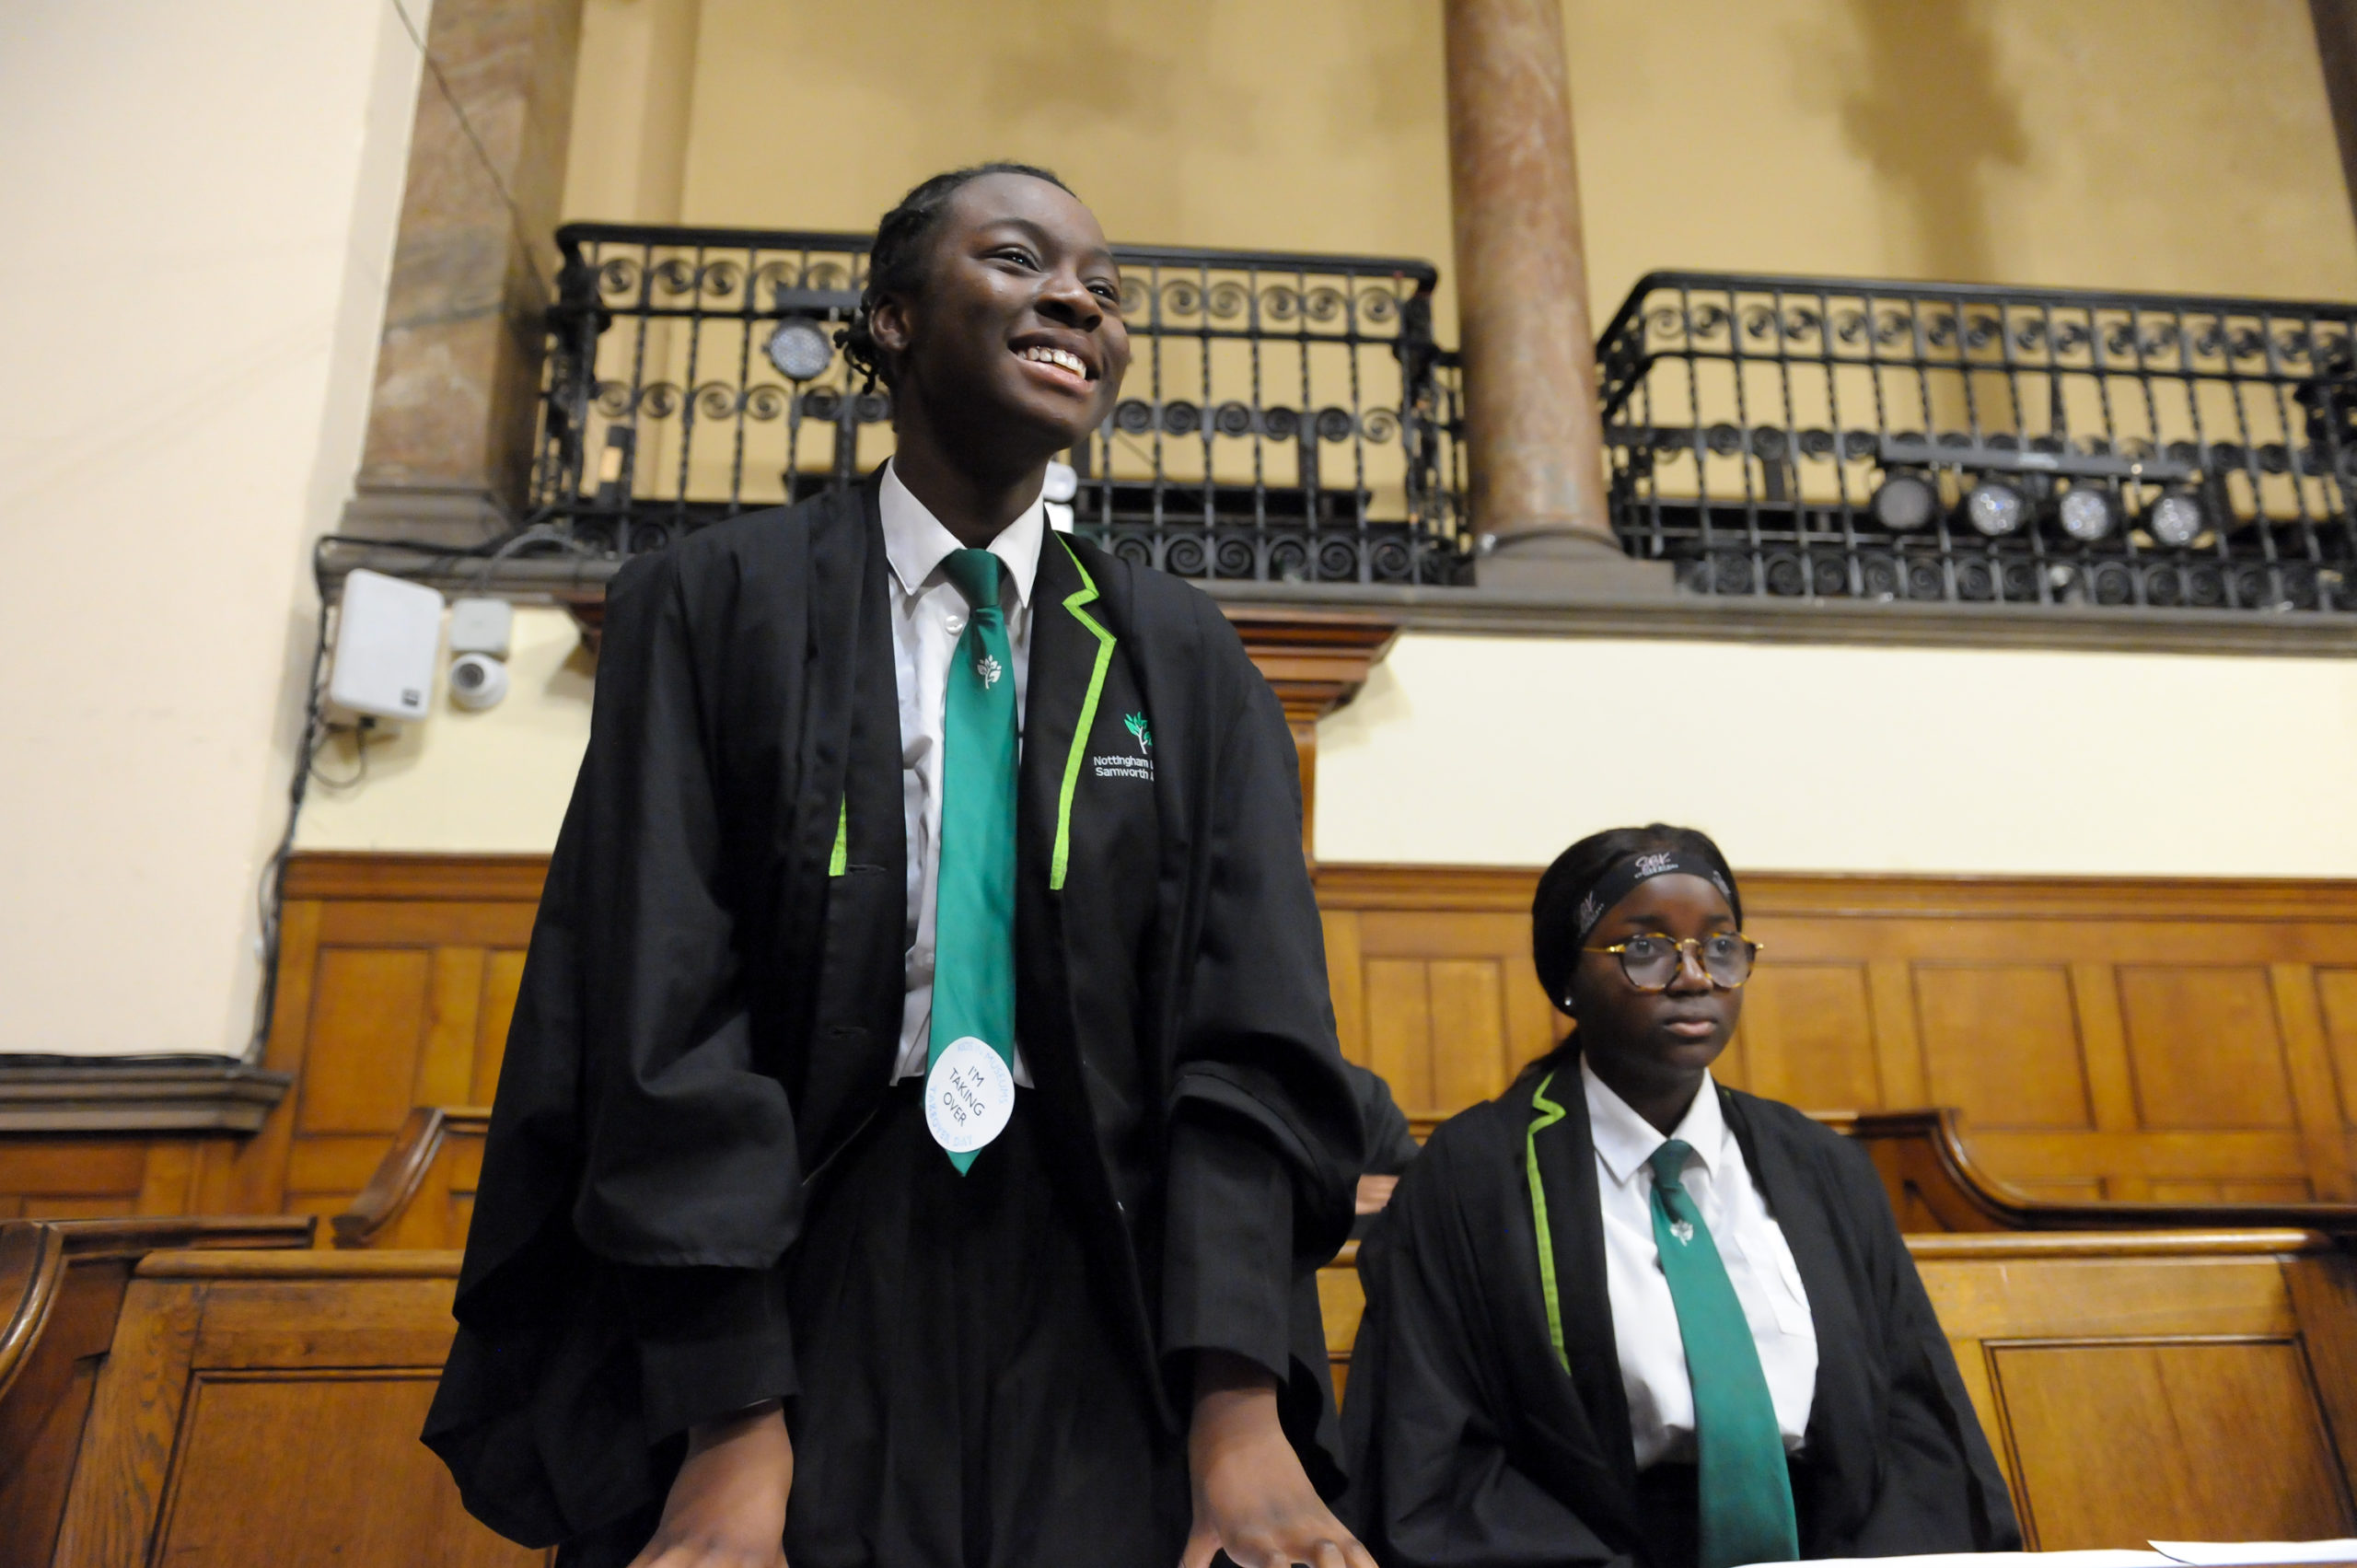 Two young women in the courtroom, the one nearest standing, smiling and wearing a takeover day sticker.